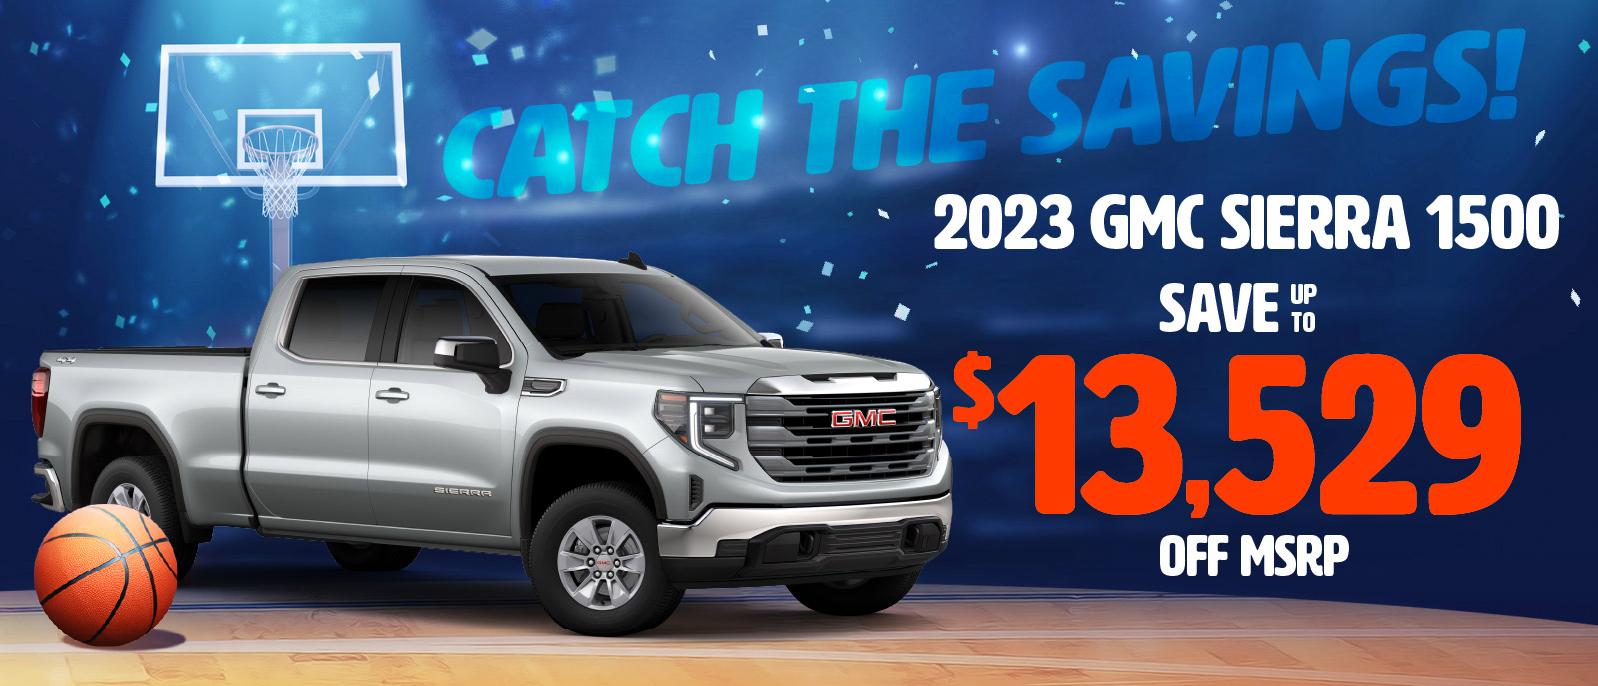 2023 GMC Sierra 1500 - save up to $13,529 off MSRP